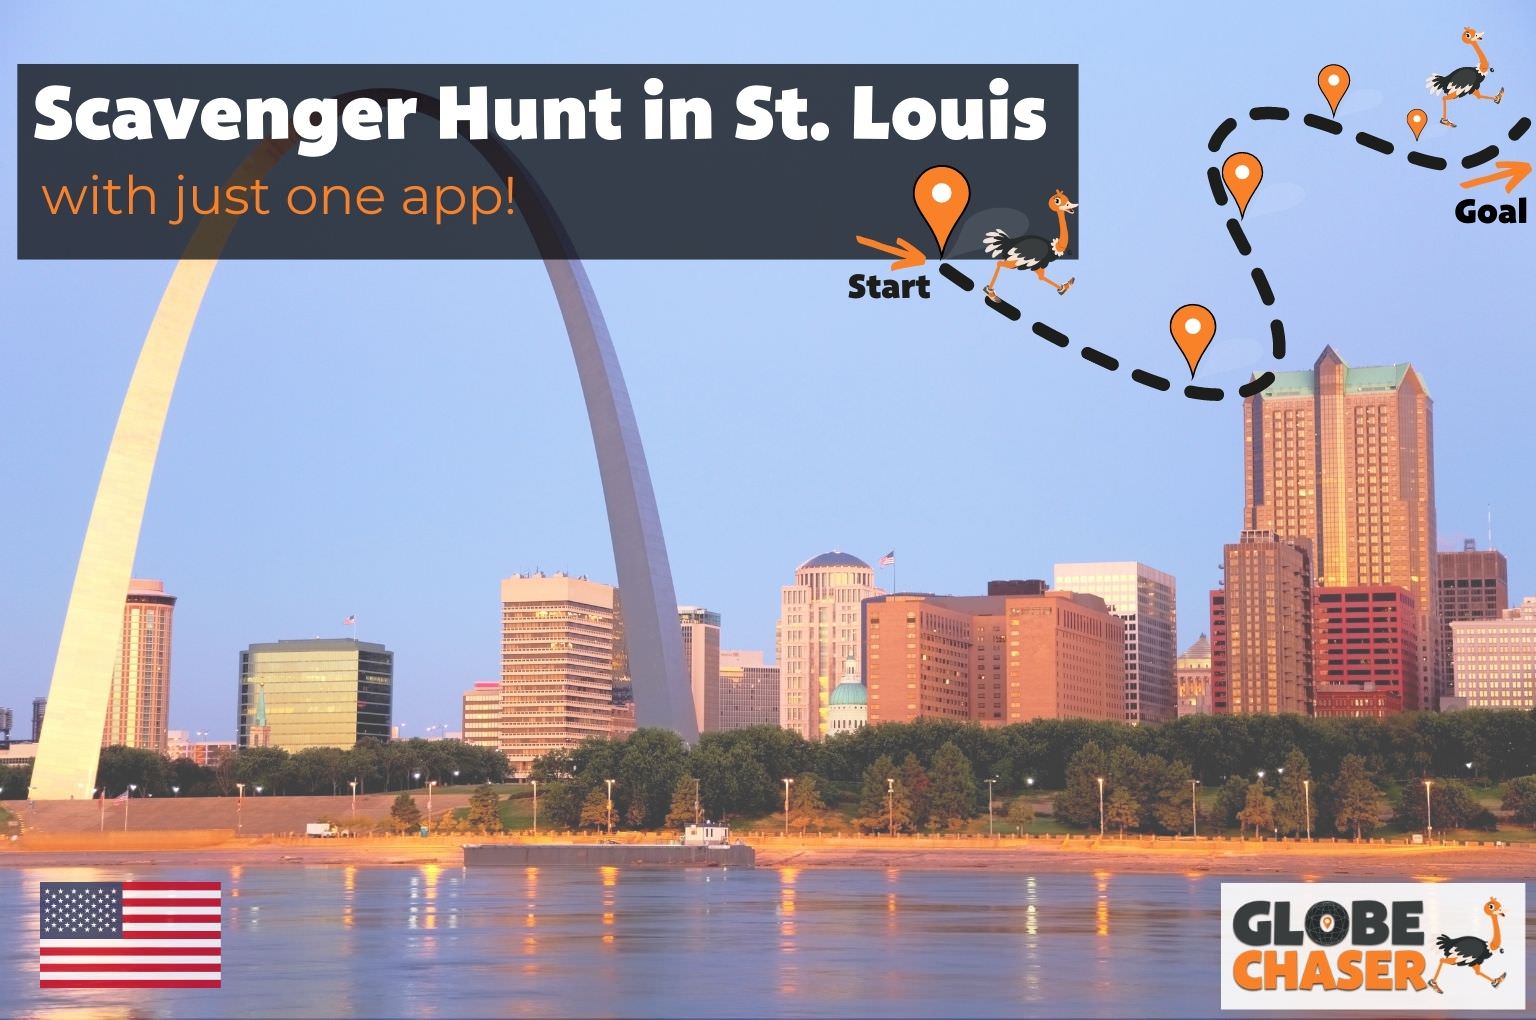 Scavenger Hunt in St. Louis, USA - Family Activities with the Globe Chaser App for Outdoor Fun